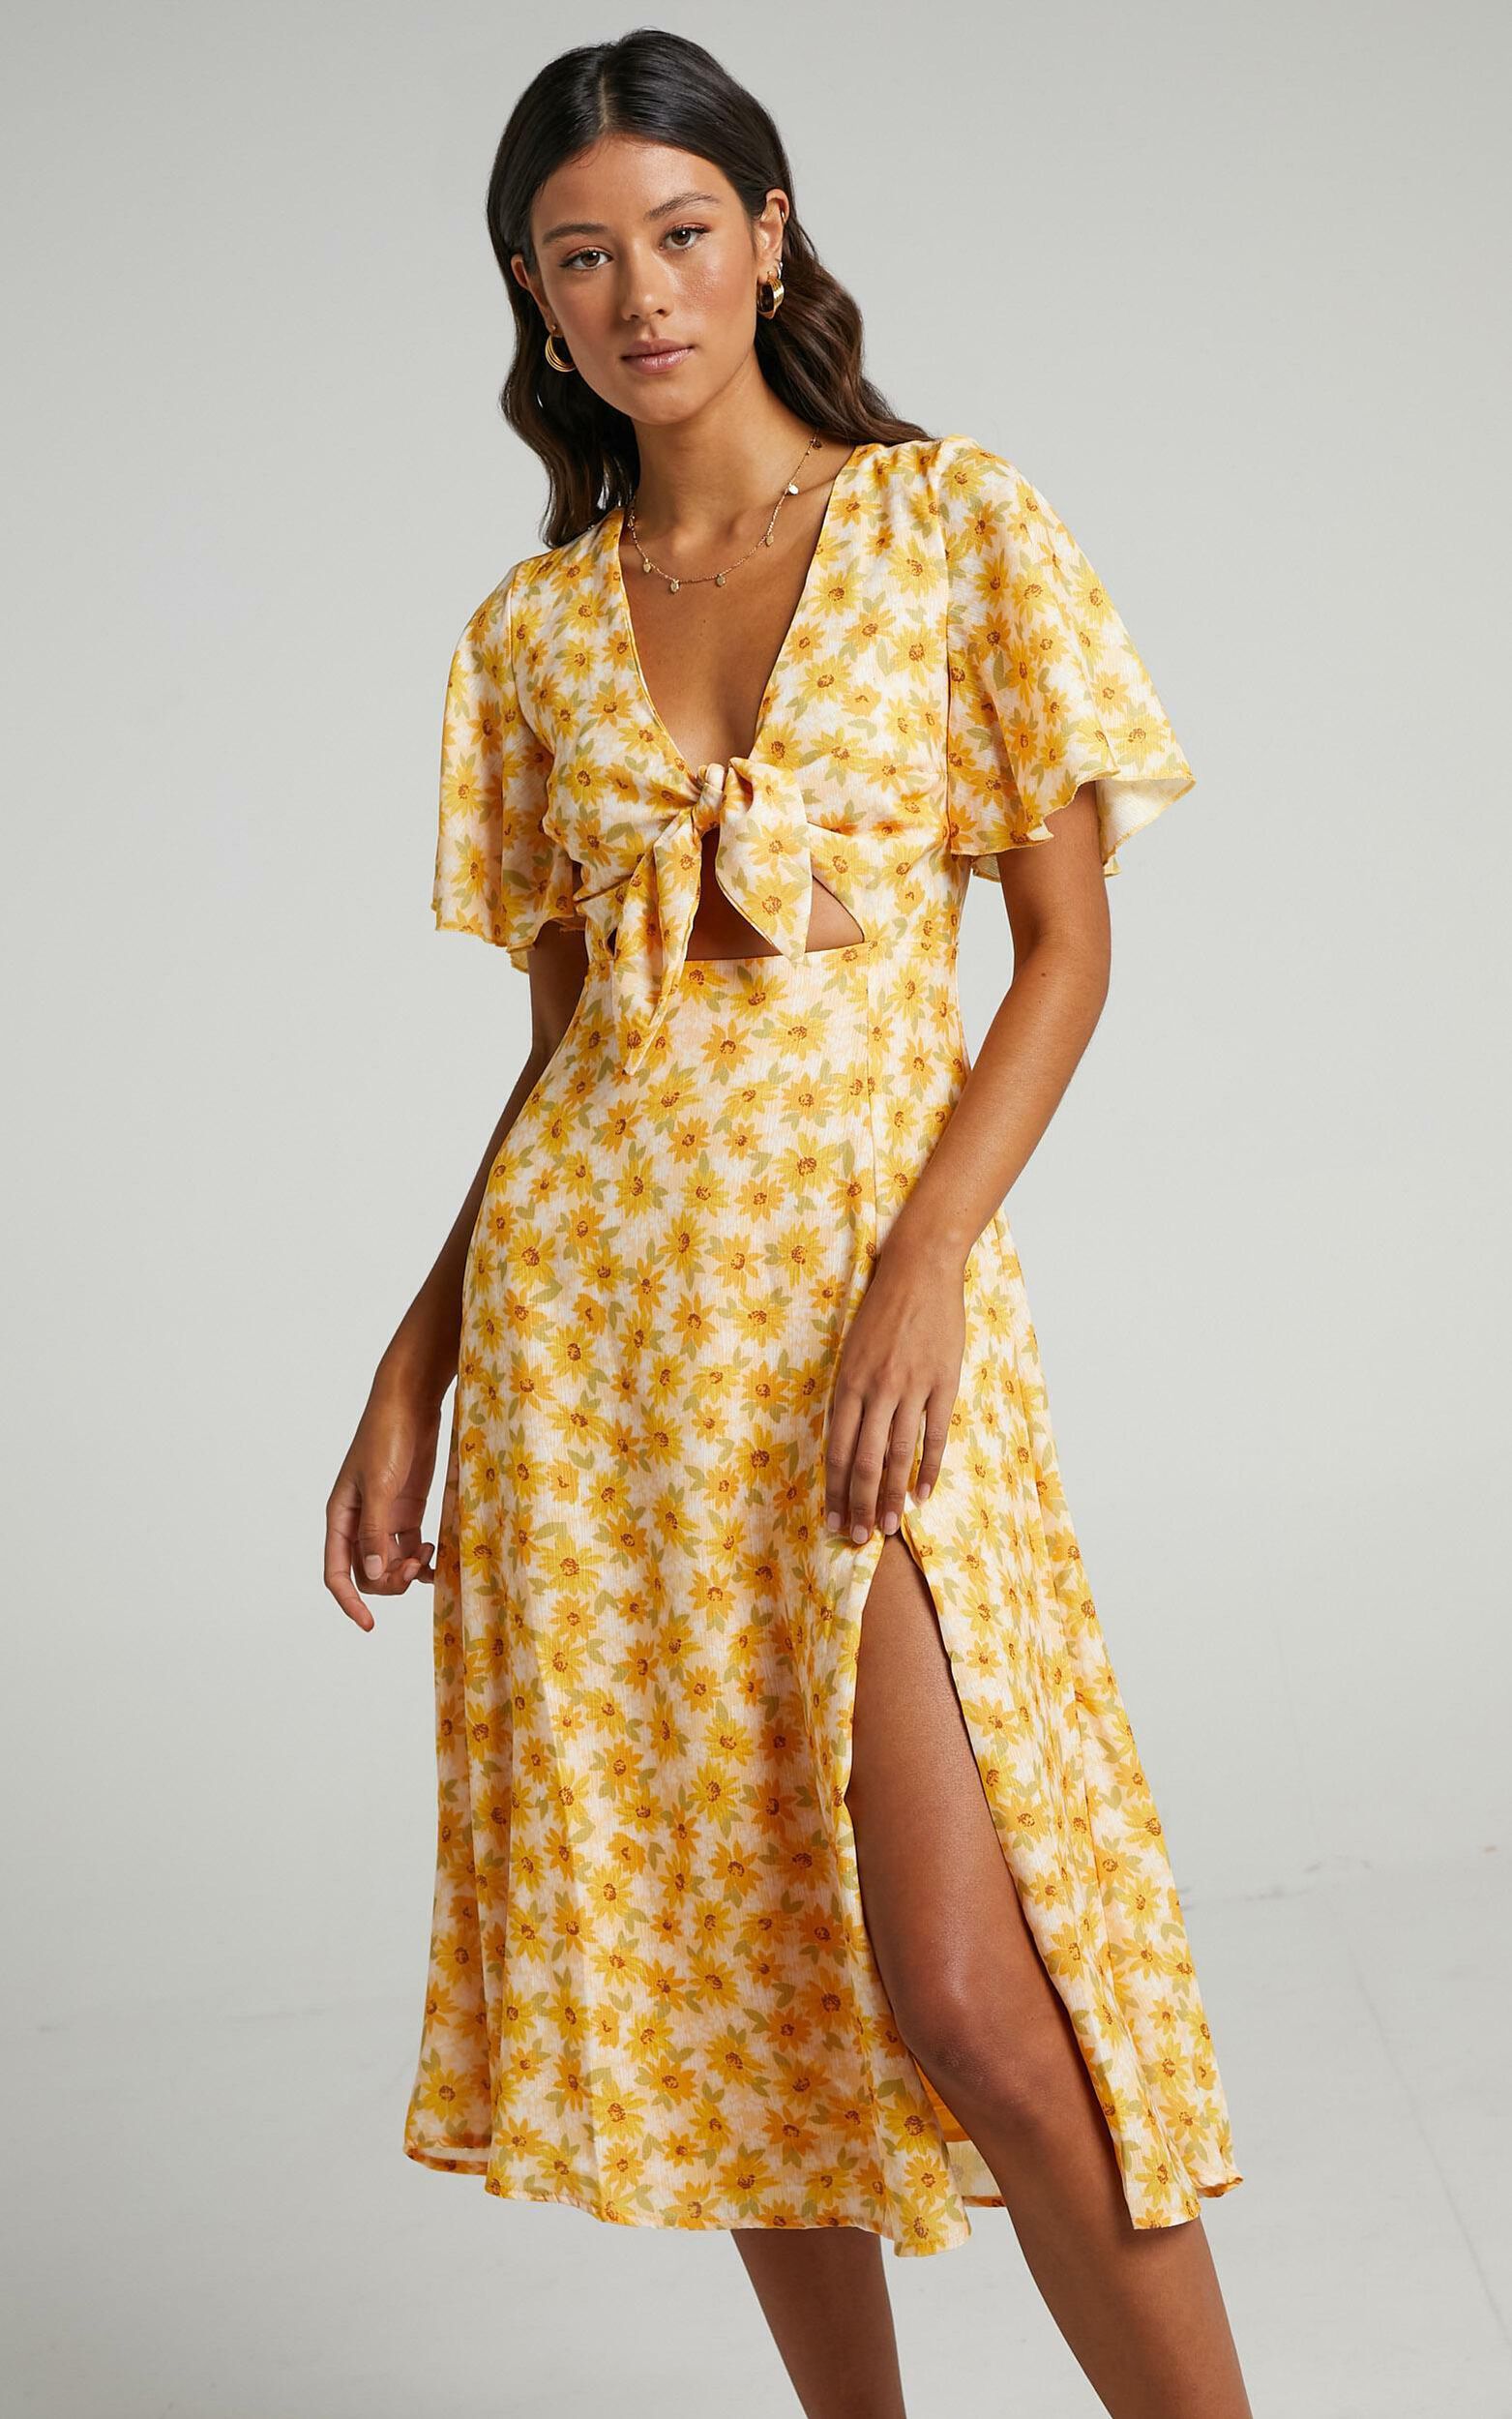 Wild And Free Mind Midi Dress - Front Tie Cut Out Dress in Sunflower Print - 04, YEL1